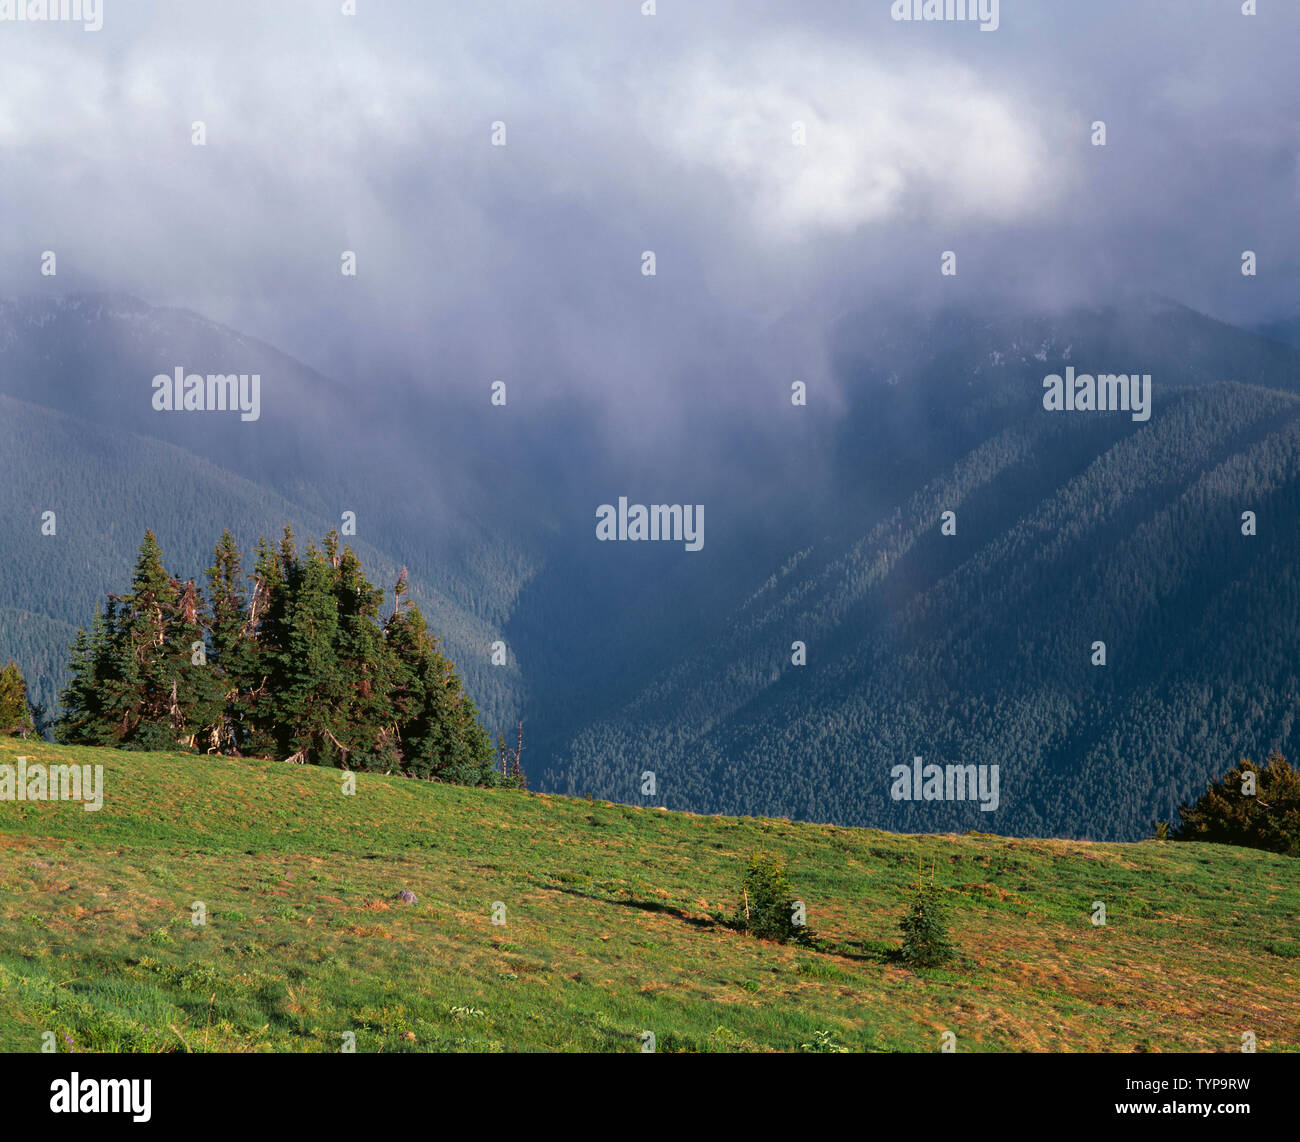 USA, Washington, Olympic National Park, Rainstorm over coniferous forest and meadow, view south from Hurricane Ridge towards Elwah Valley. Stock Photo